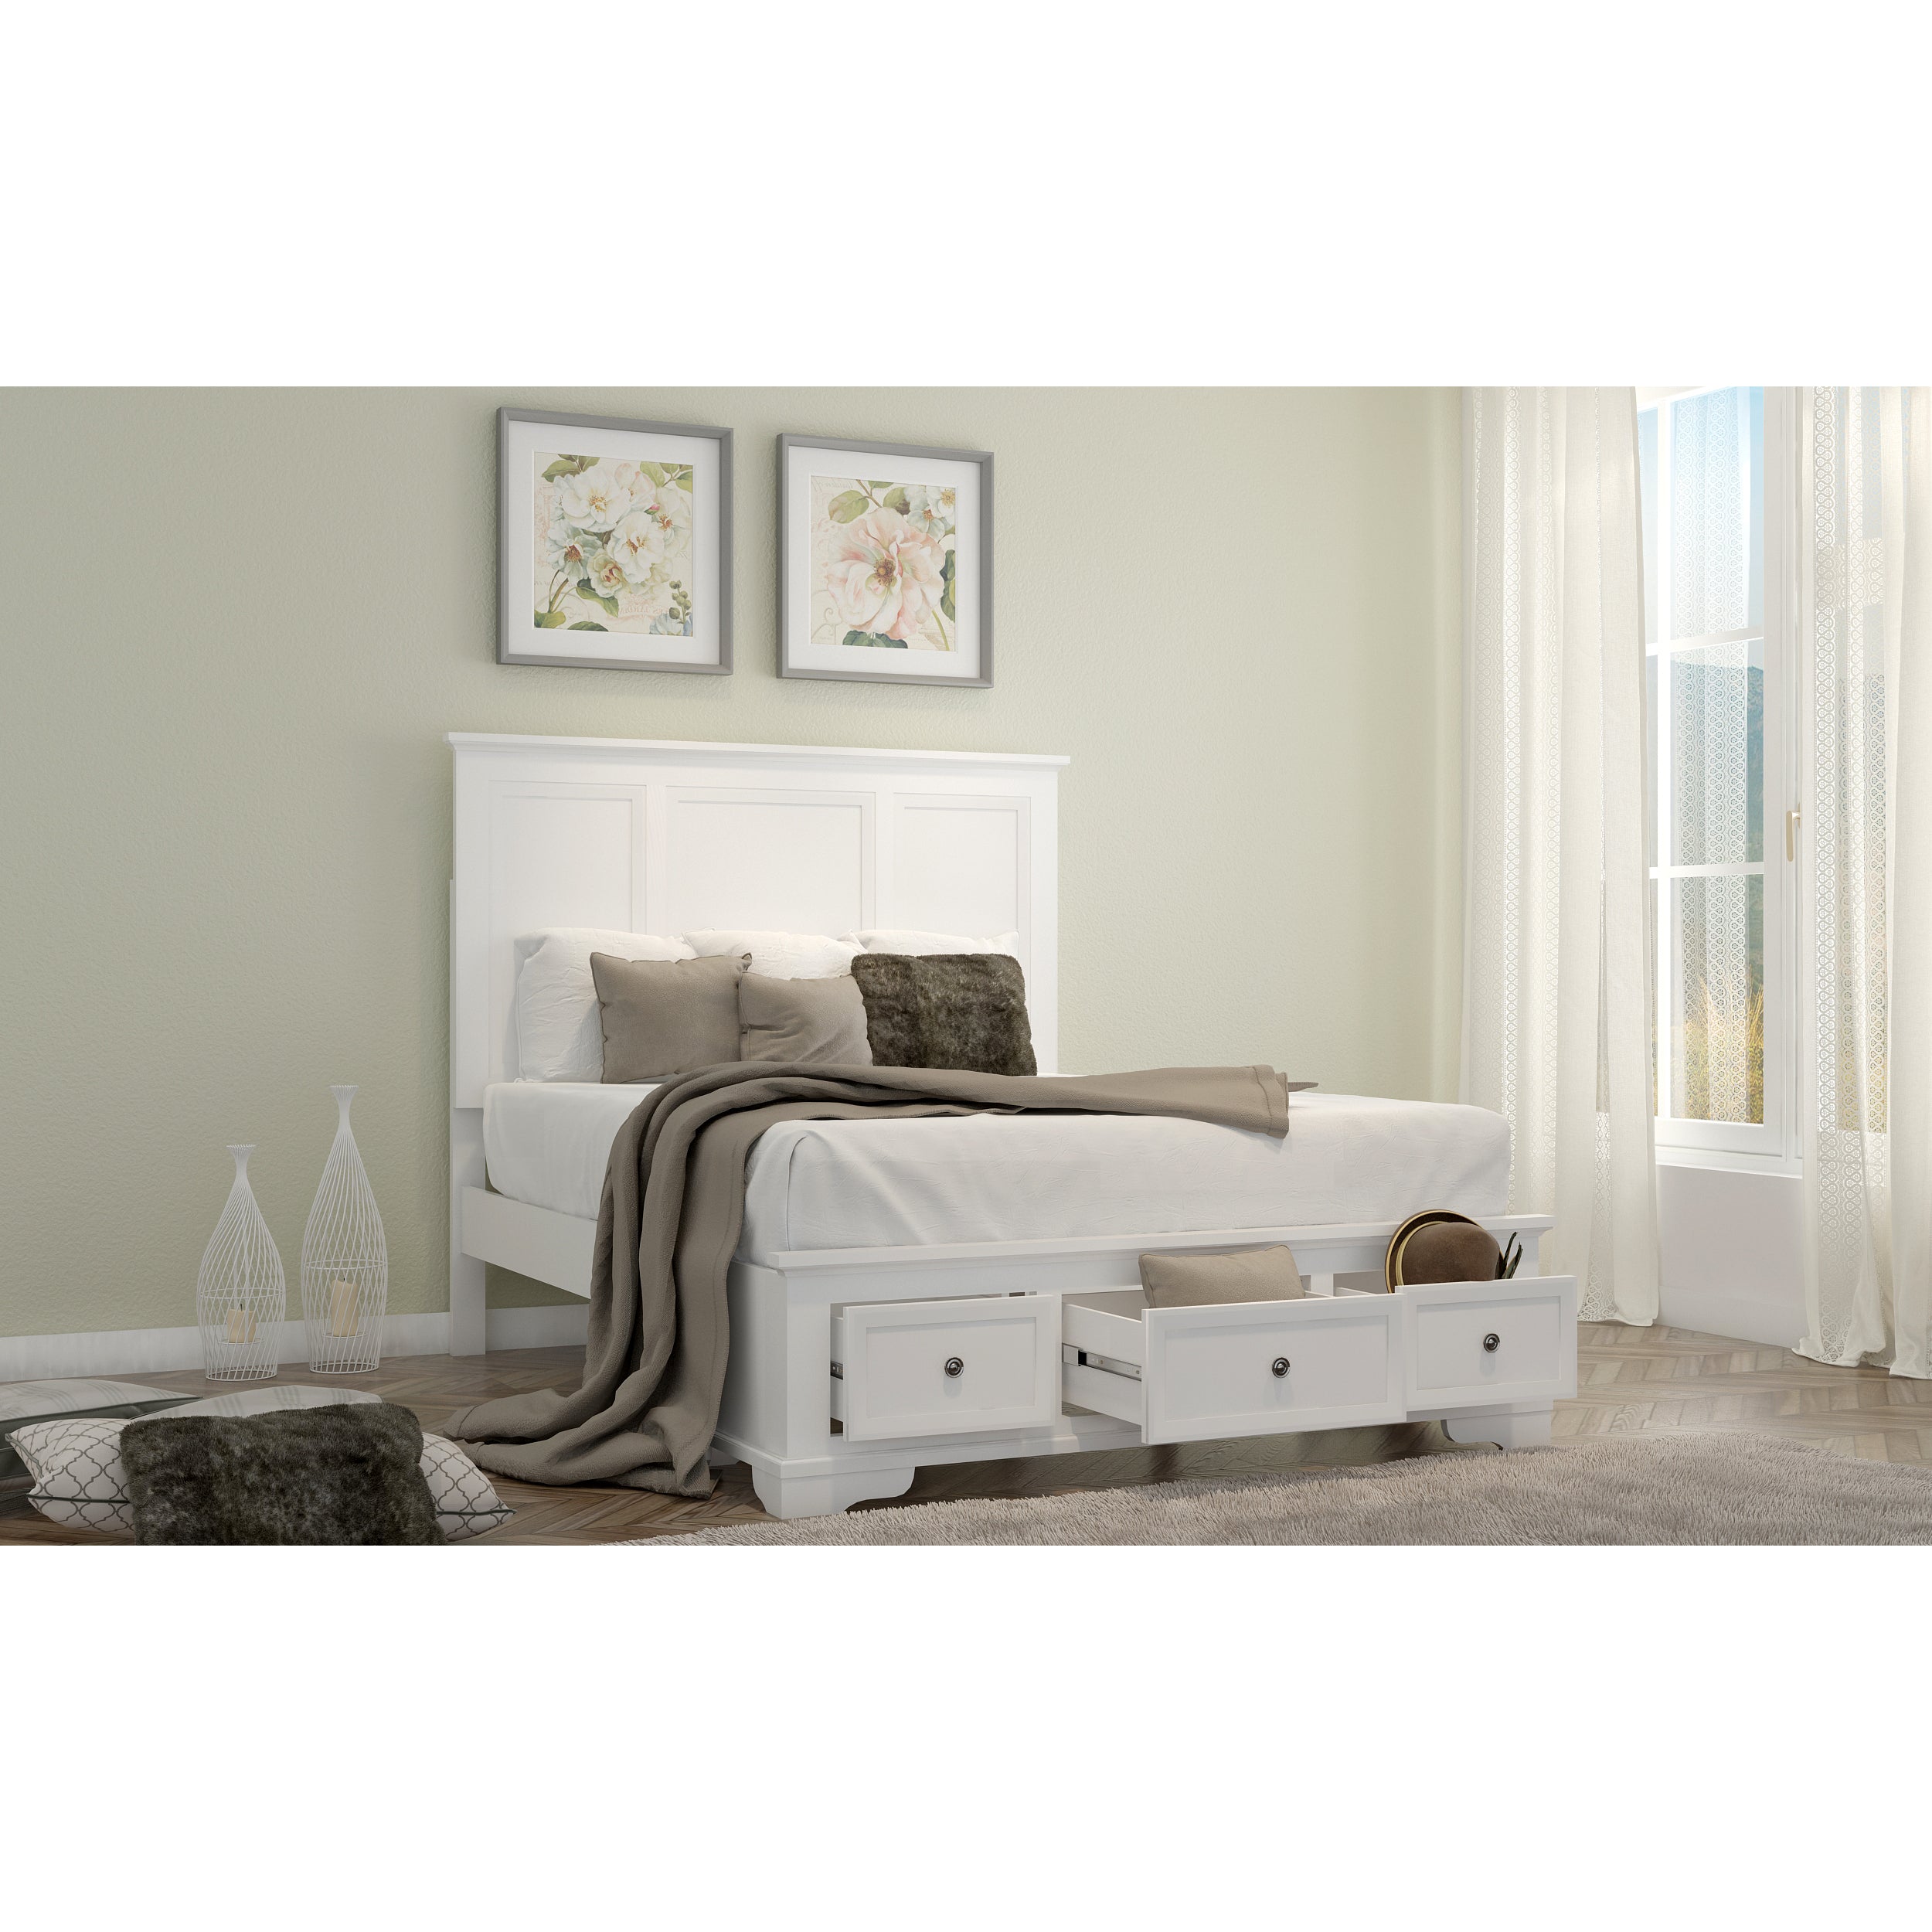 Queen Size Bed Frame With Storage Drawers - White